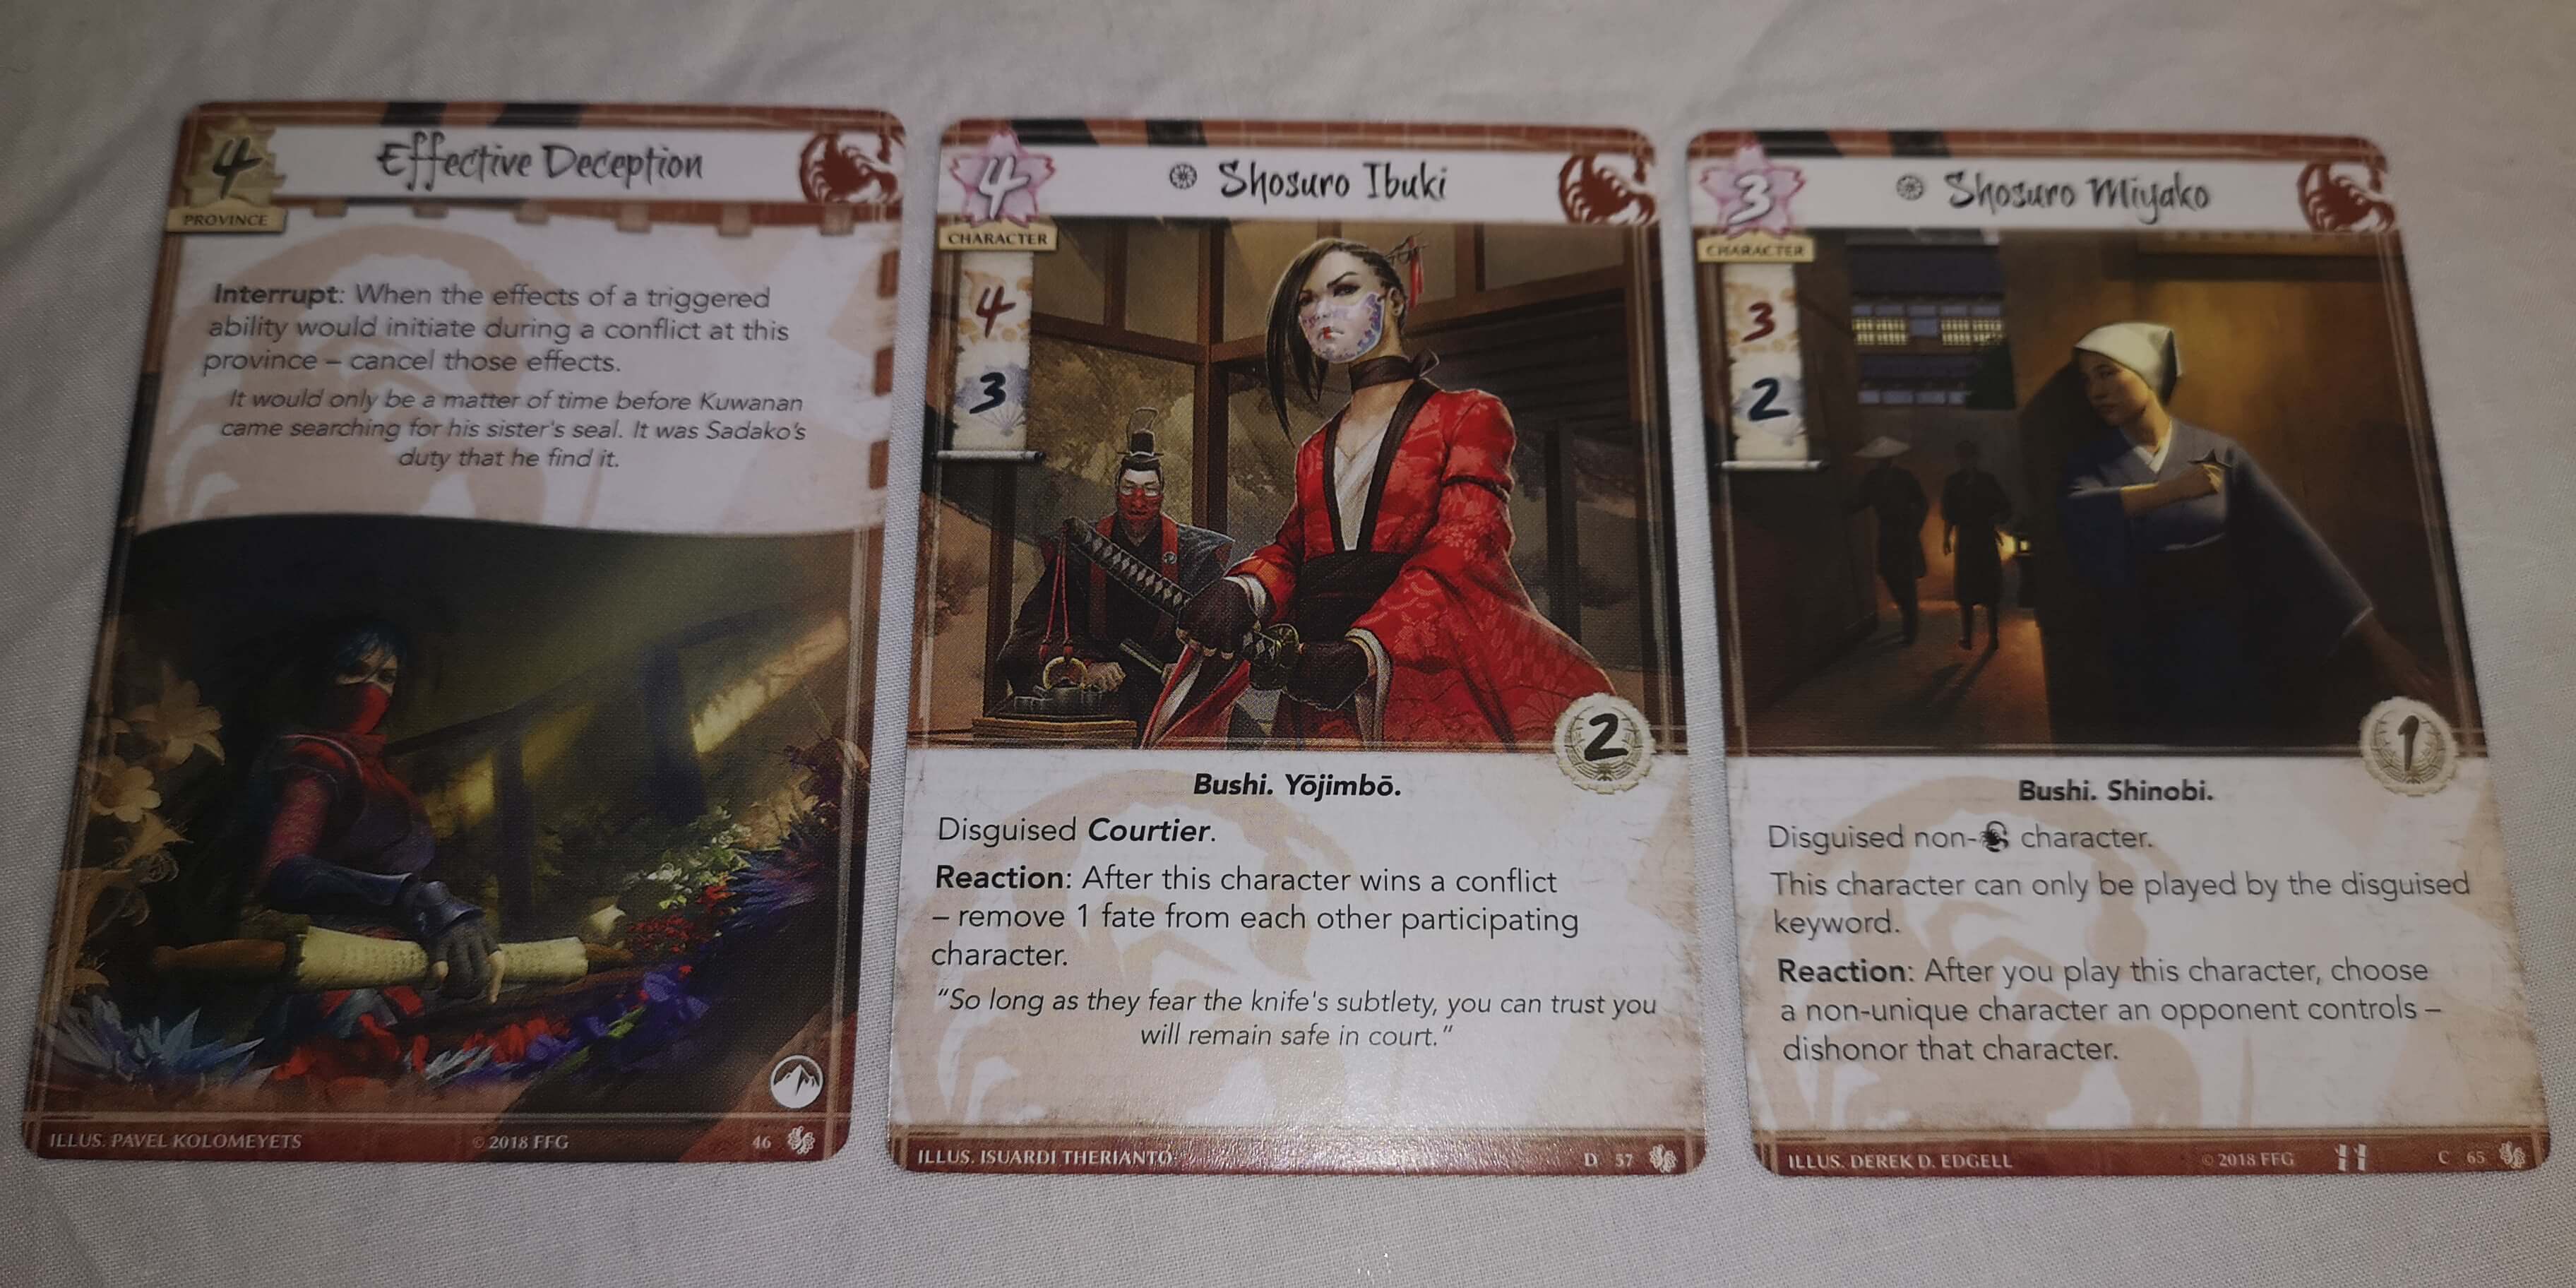 L5R LCG Justice for Satsume